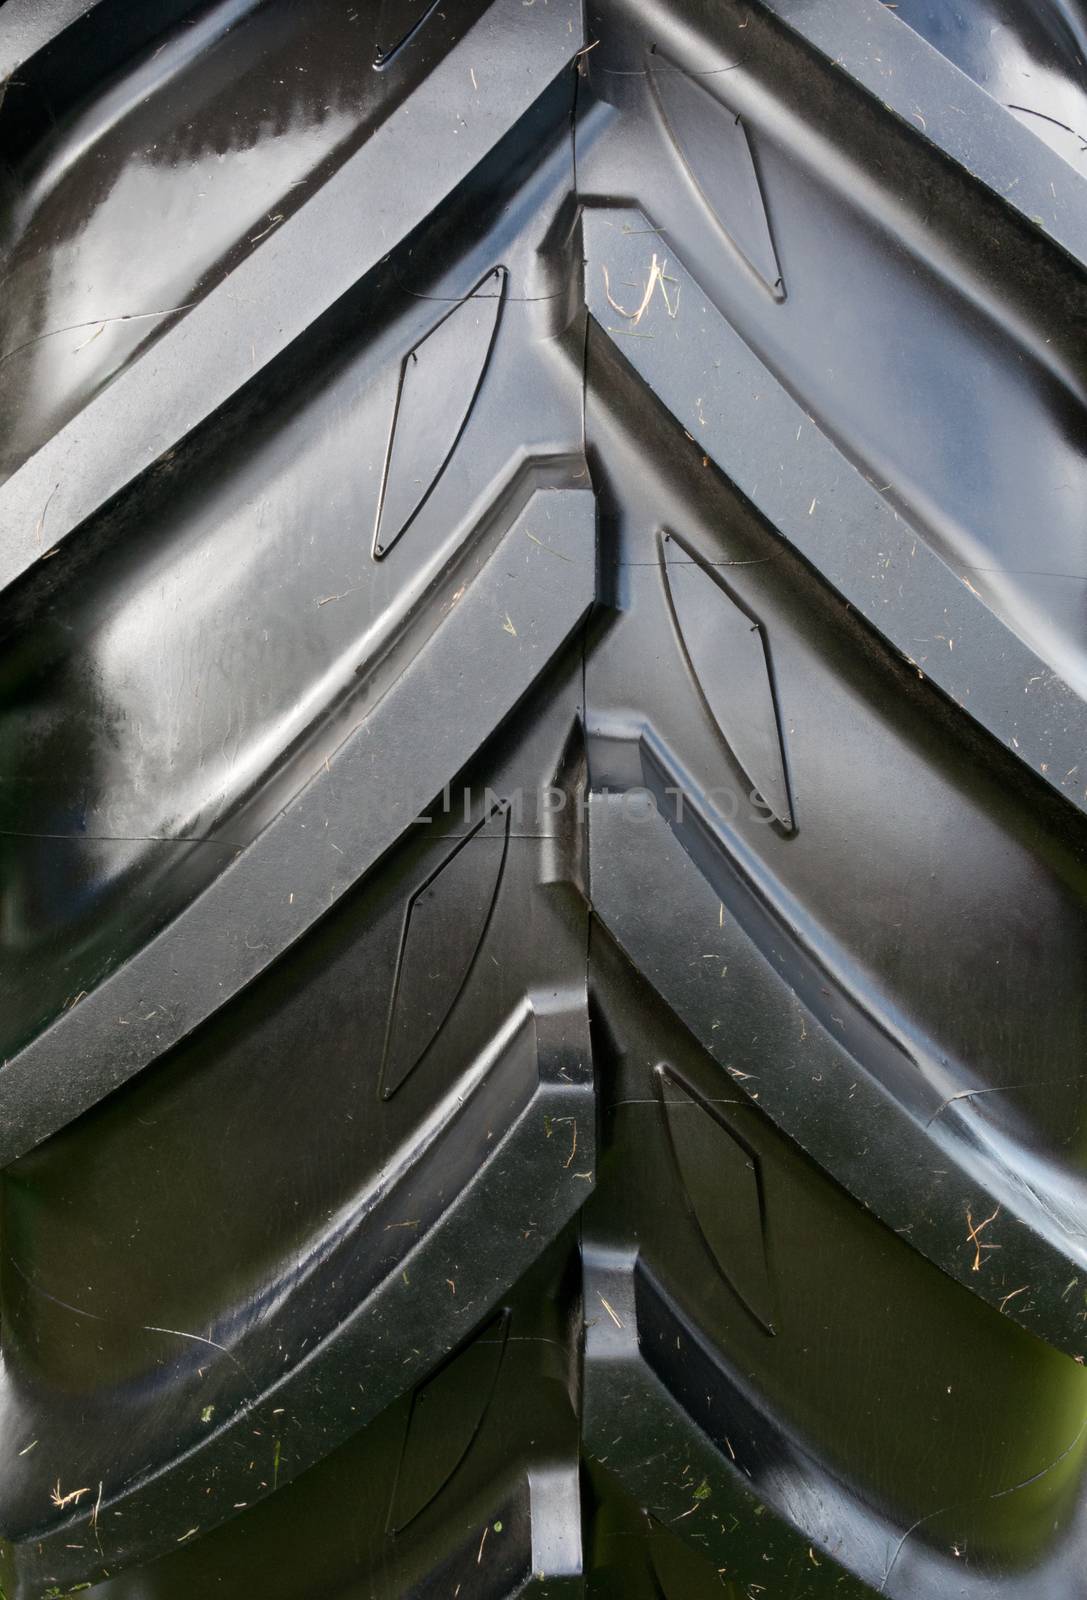 Tractor Tyre Tread by TimAwe